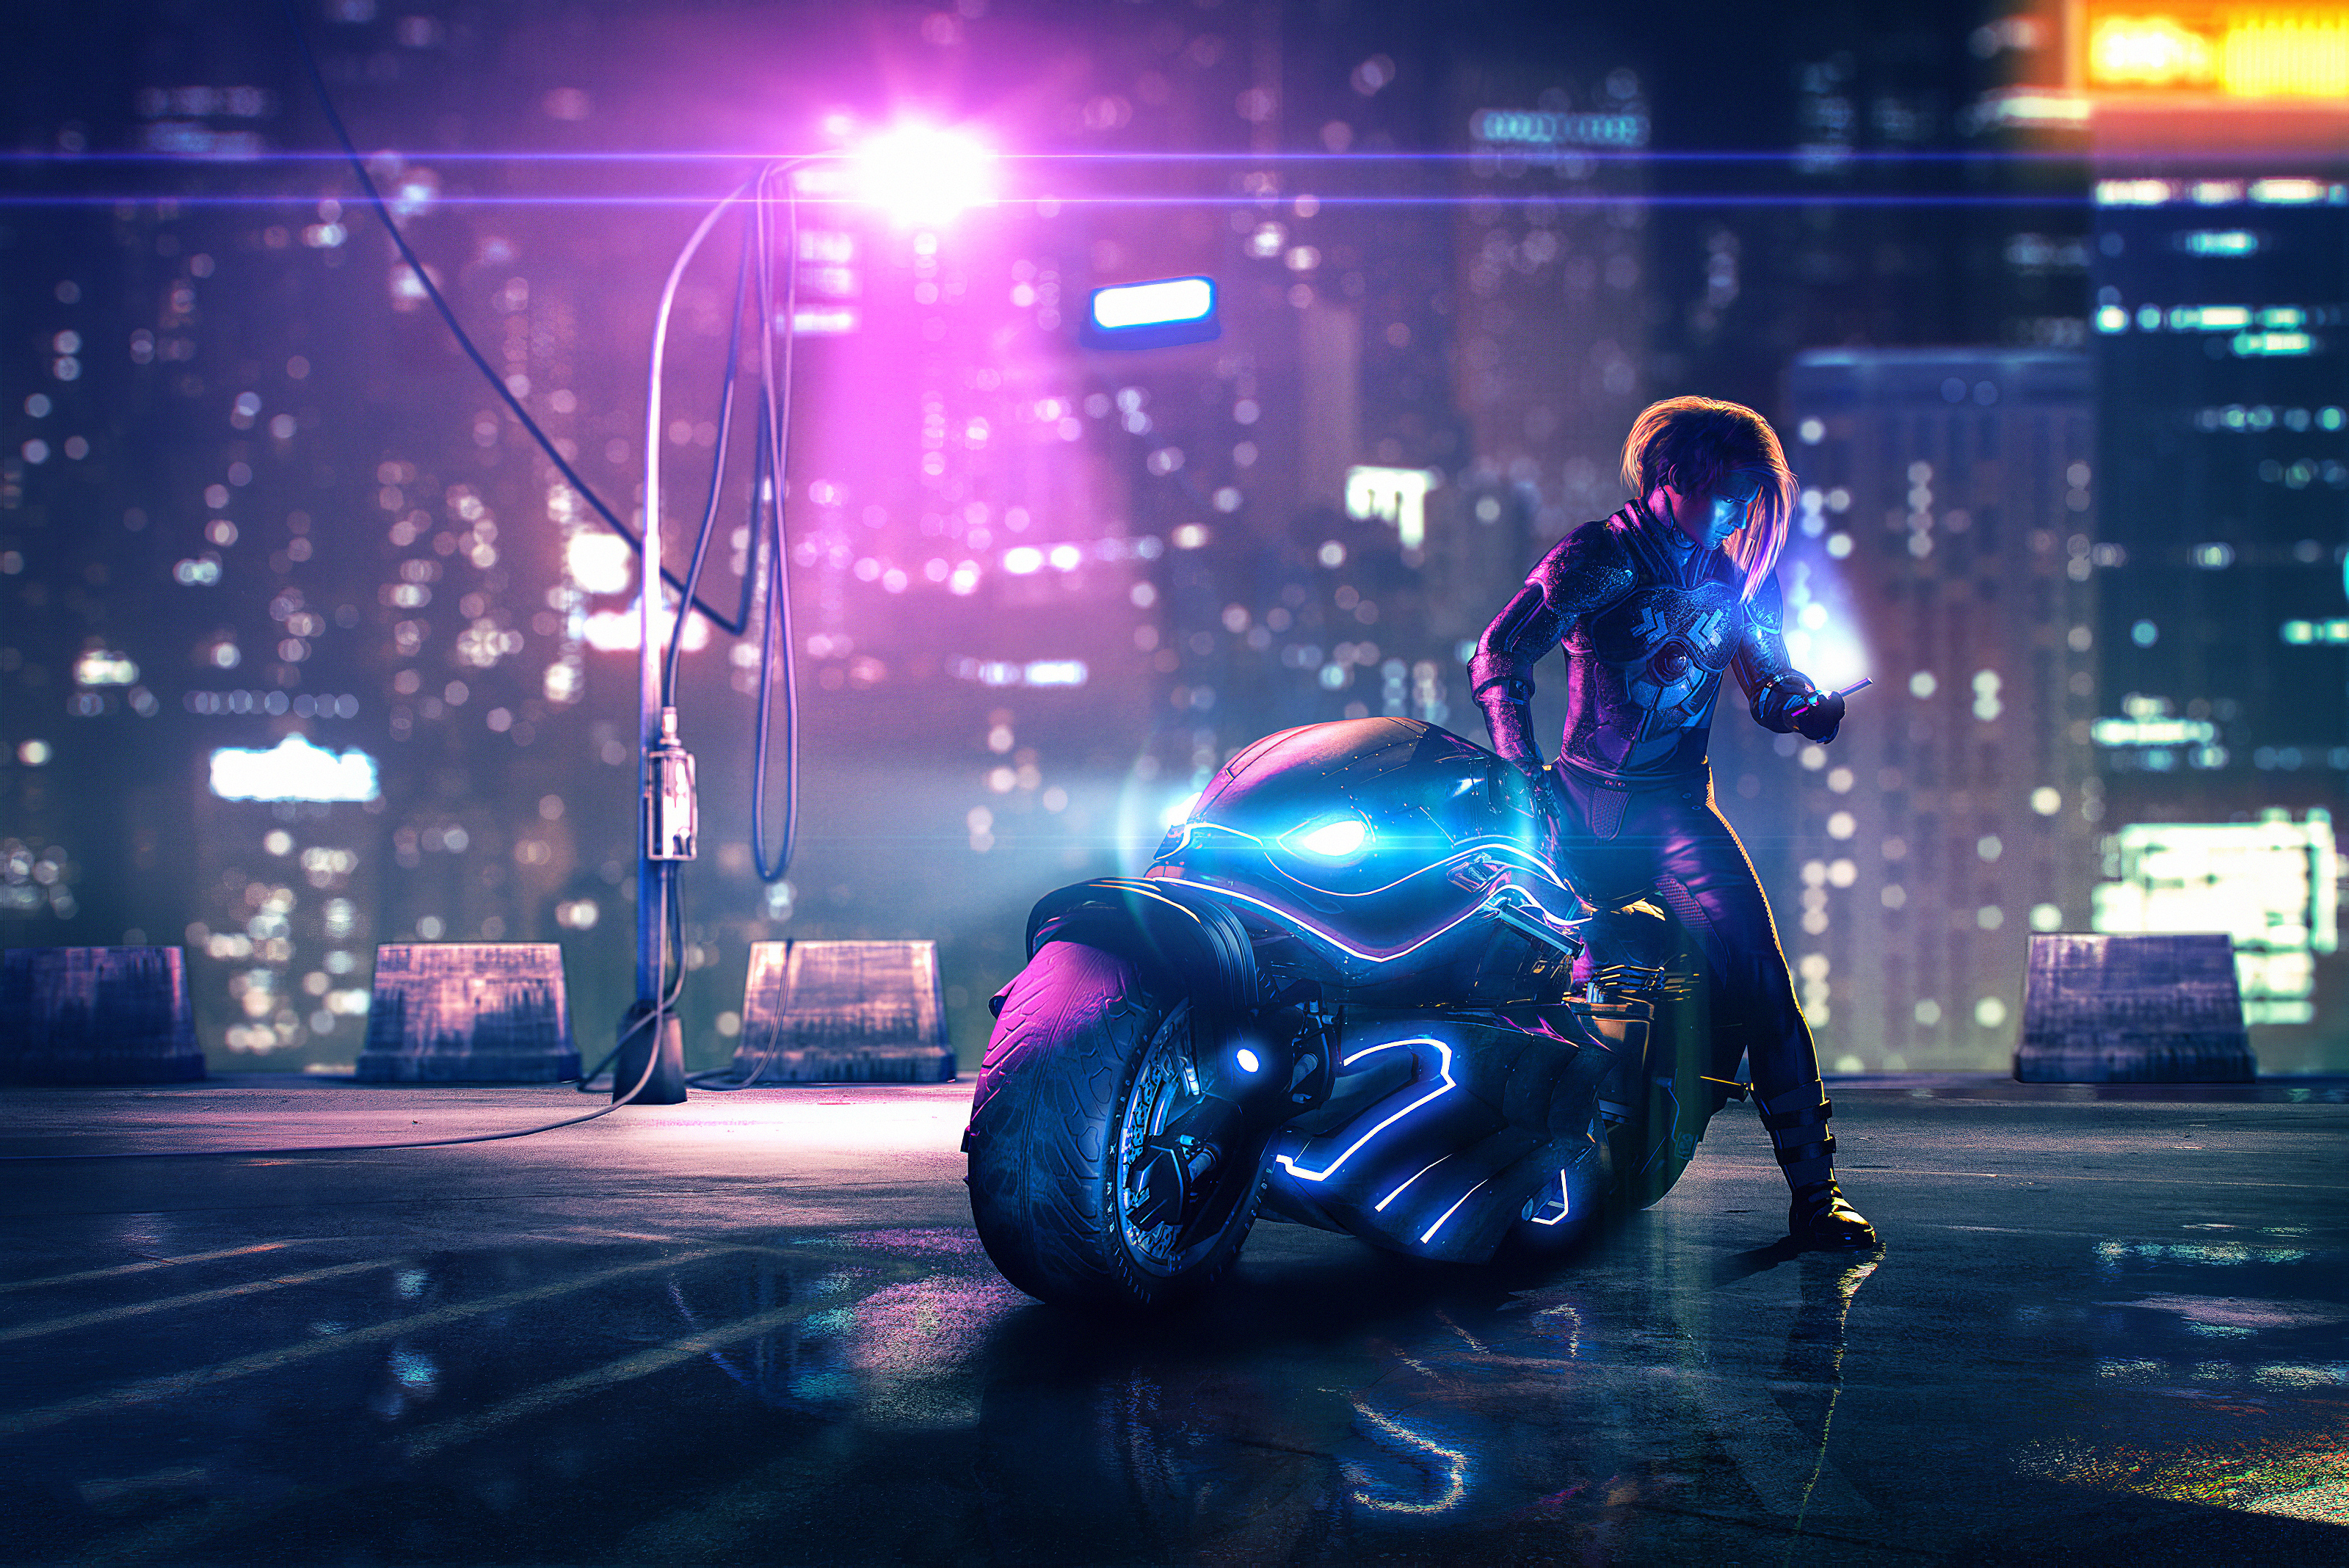 1125x2436 Anime Girl Cyberpunk Ride 4k Iphone XS,Iphone 10,Iphone X ,HD 4k  Wallpapers,Images,Backgrounds,Photos and Pictures